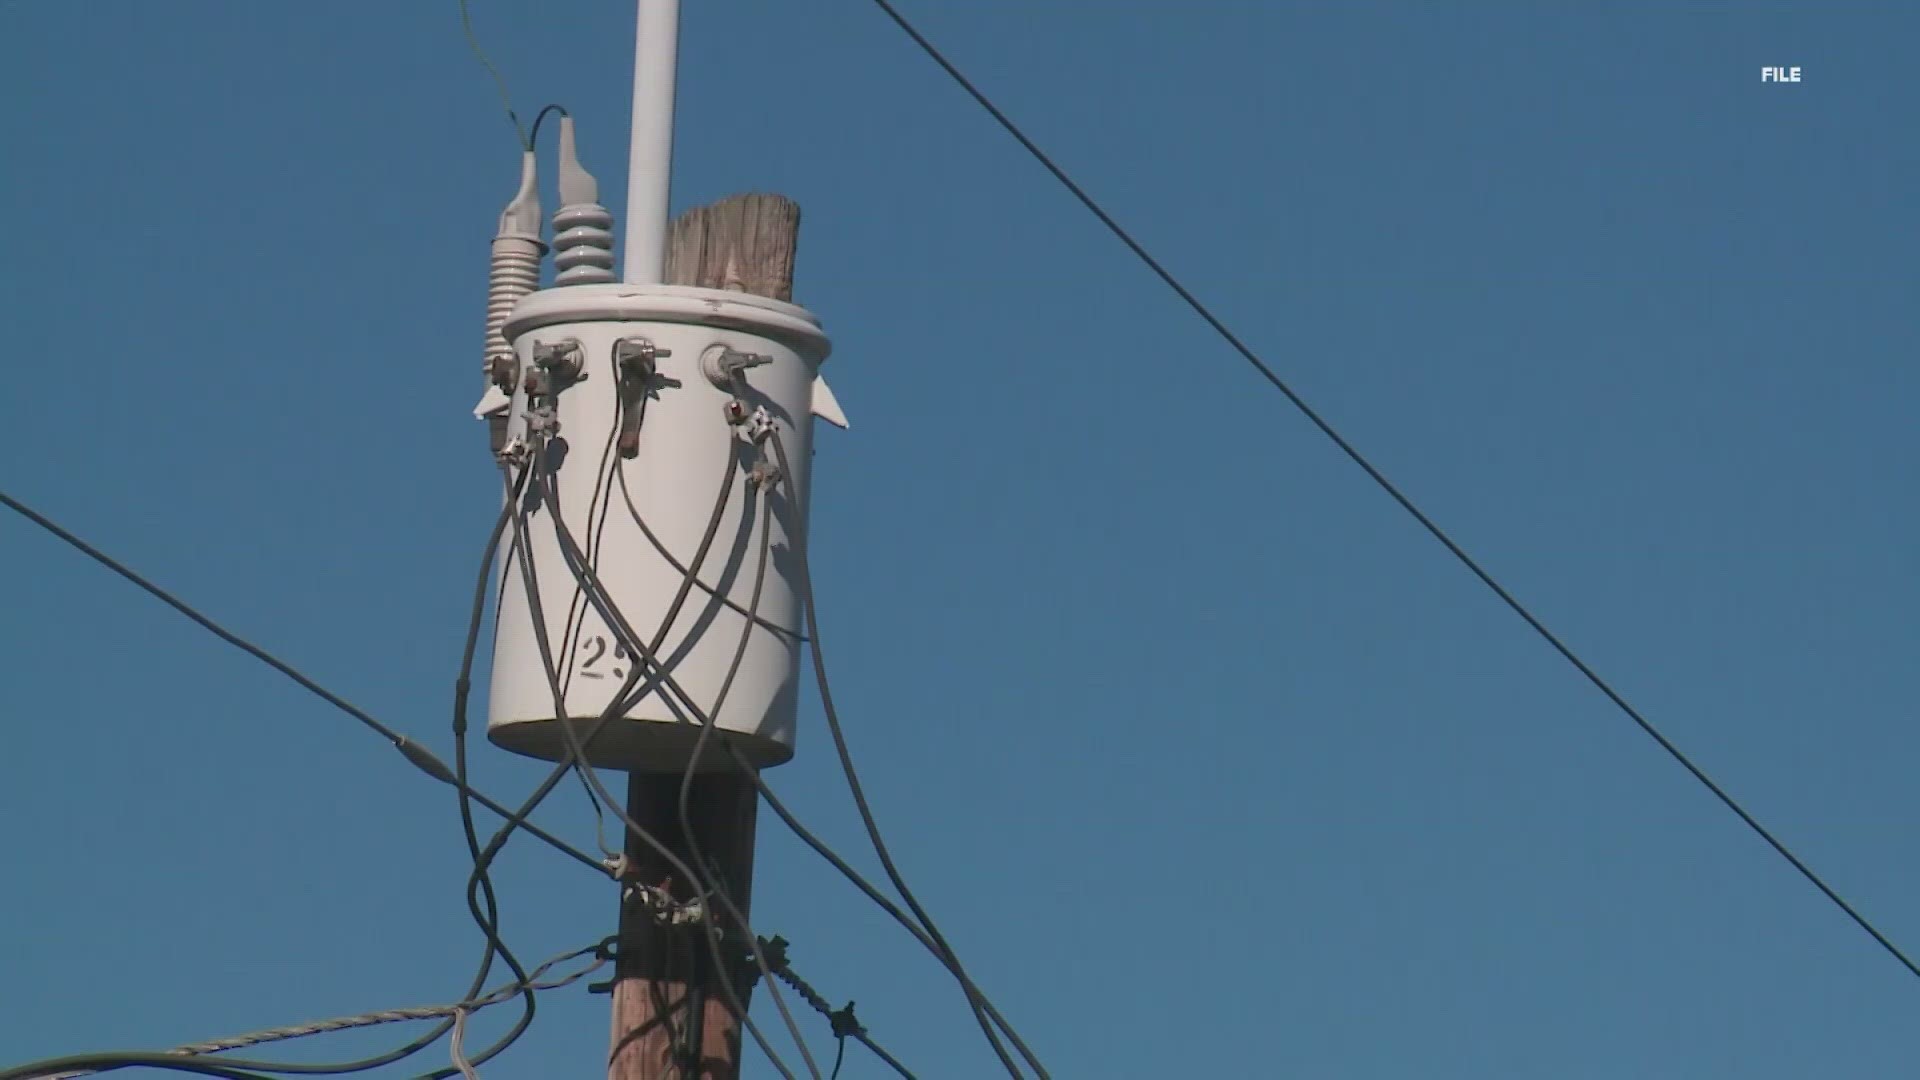 The Maine Public Utilities Commission is holding a public hearing Tuesday in Bangor. Commissioners say Versant is asking for an increase in distribution rates.